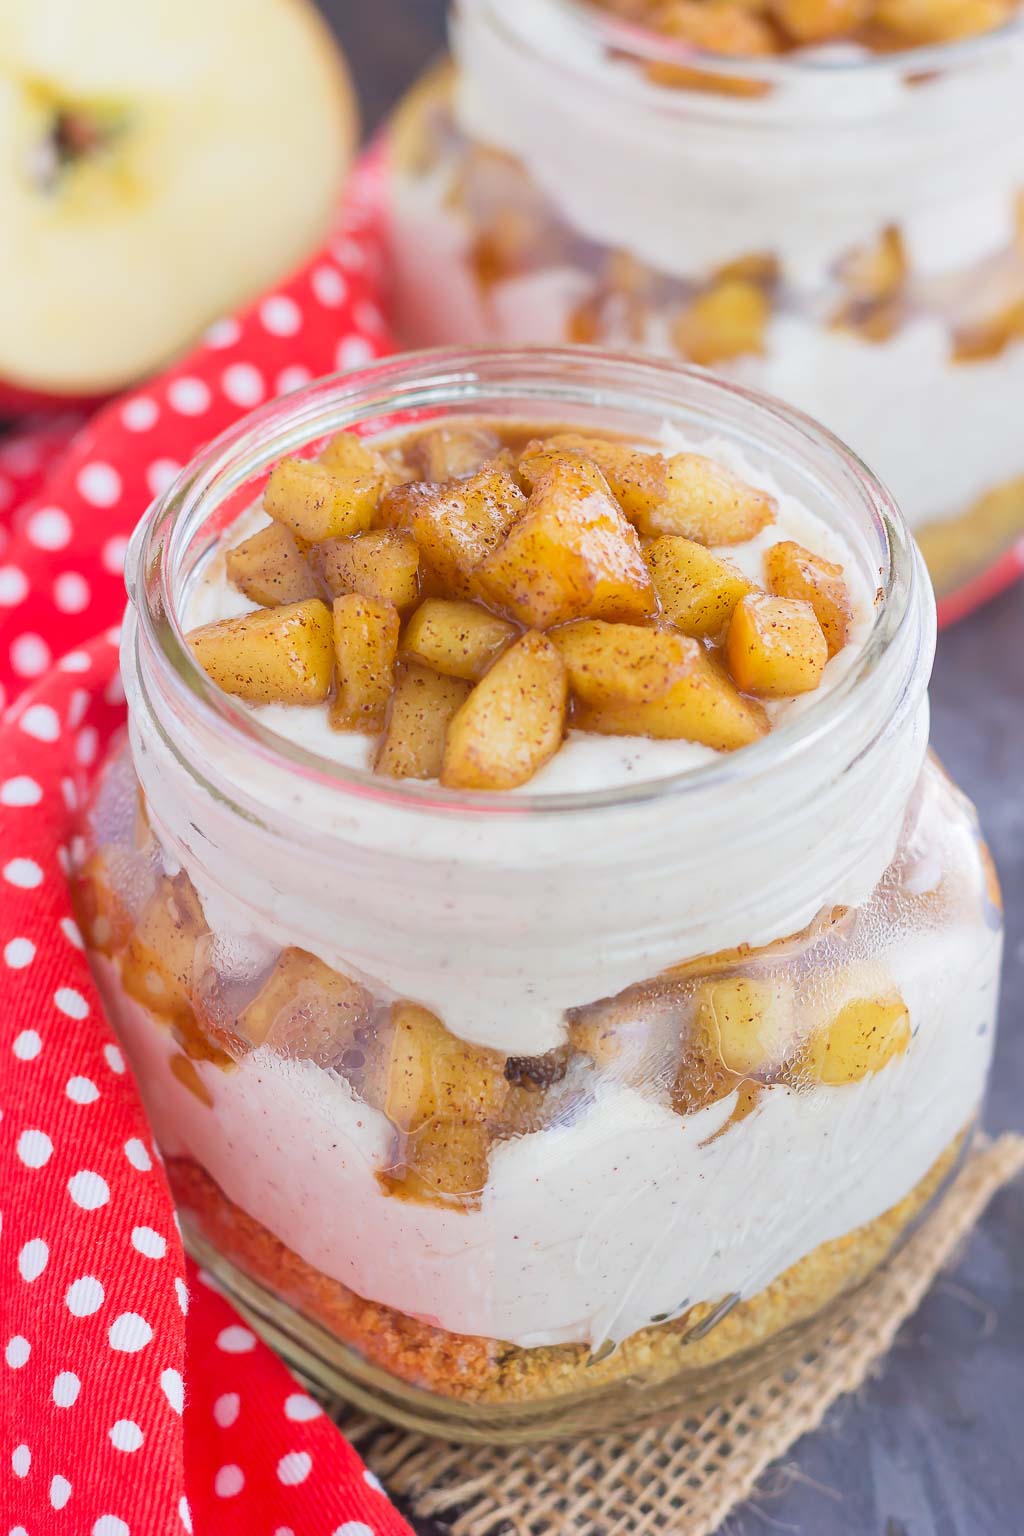 This No-Bake Apple Cinnamon Cheesecake features a creamy, apple spice batter that's layered on top of crushed graham crackers and topped with tender, cinnamon and brown sugar apples. It's an easy treat that's ready in no time and perfect for fall! #cheesecake #nobakecheesecake #nobakecheesecakerecipe #applecinnamoncheesecake #applecheesecake #nobakeapplecheesecake #cheesecakerecipes #falldessert #appledessert #dessert